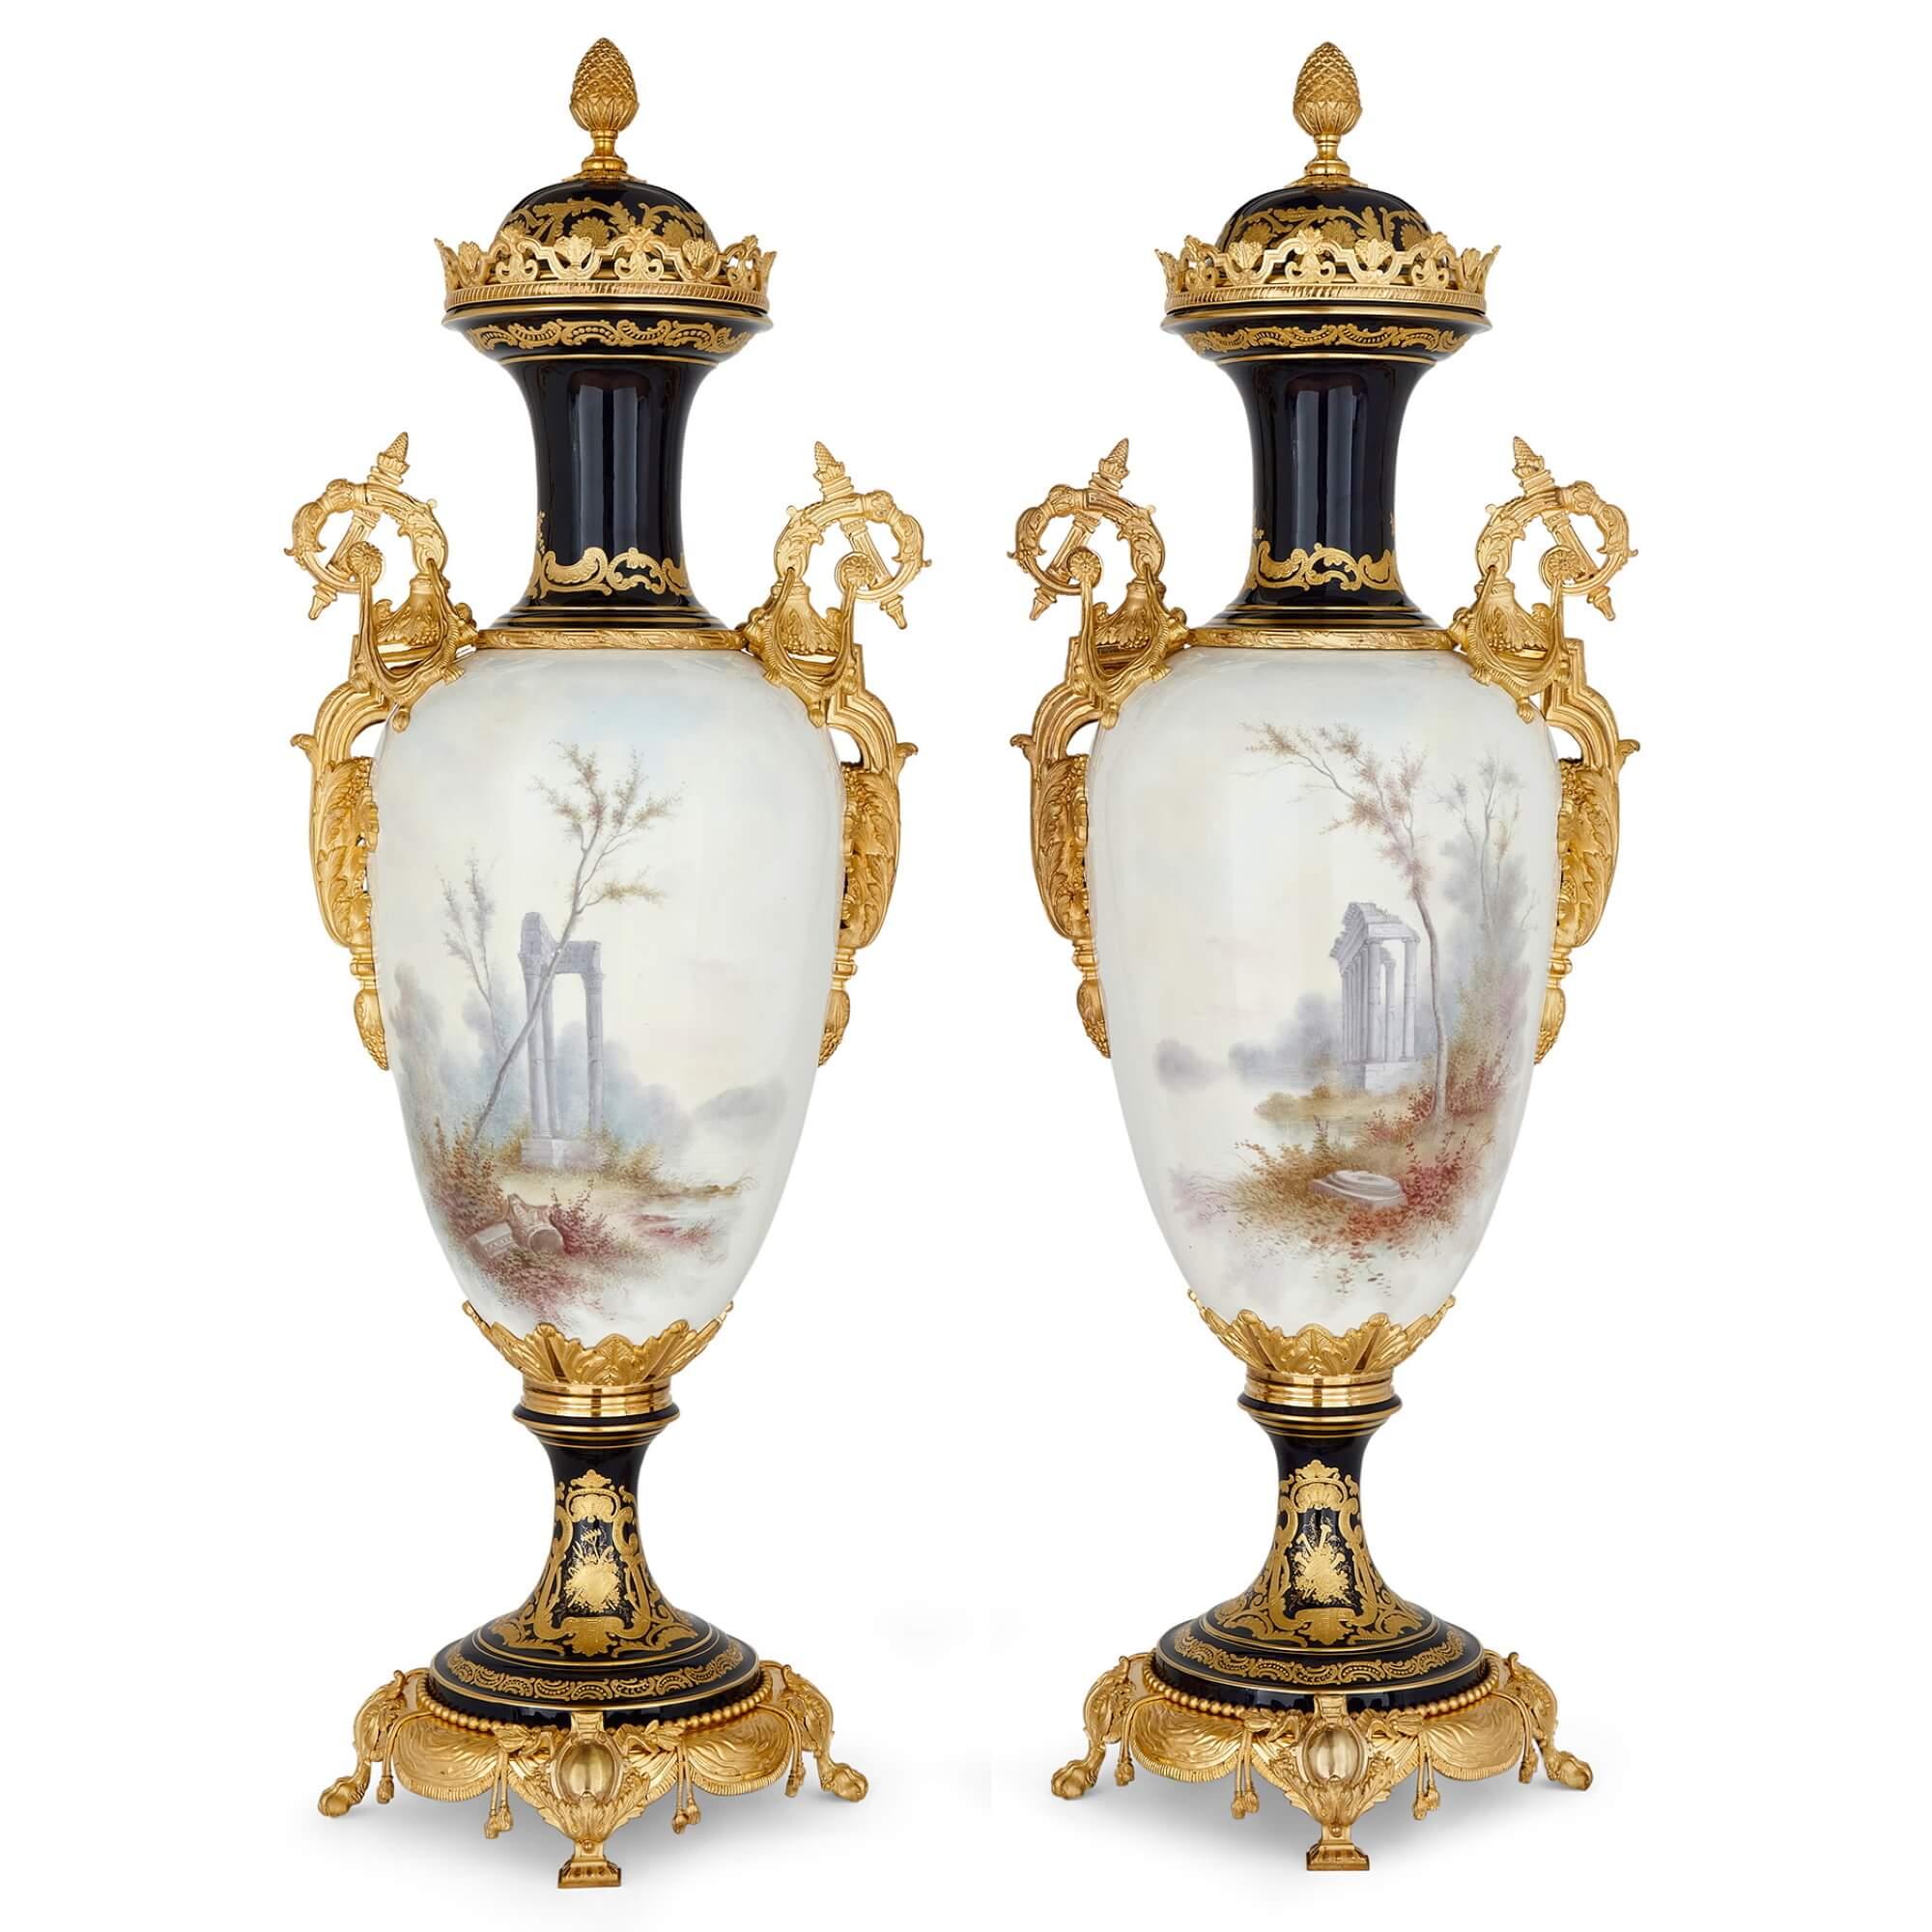 Neoclassical Pair of Large Ormolu Mounted Sèvres Style Porcelain Vases For Sale